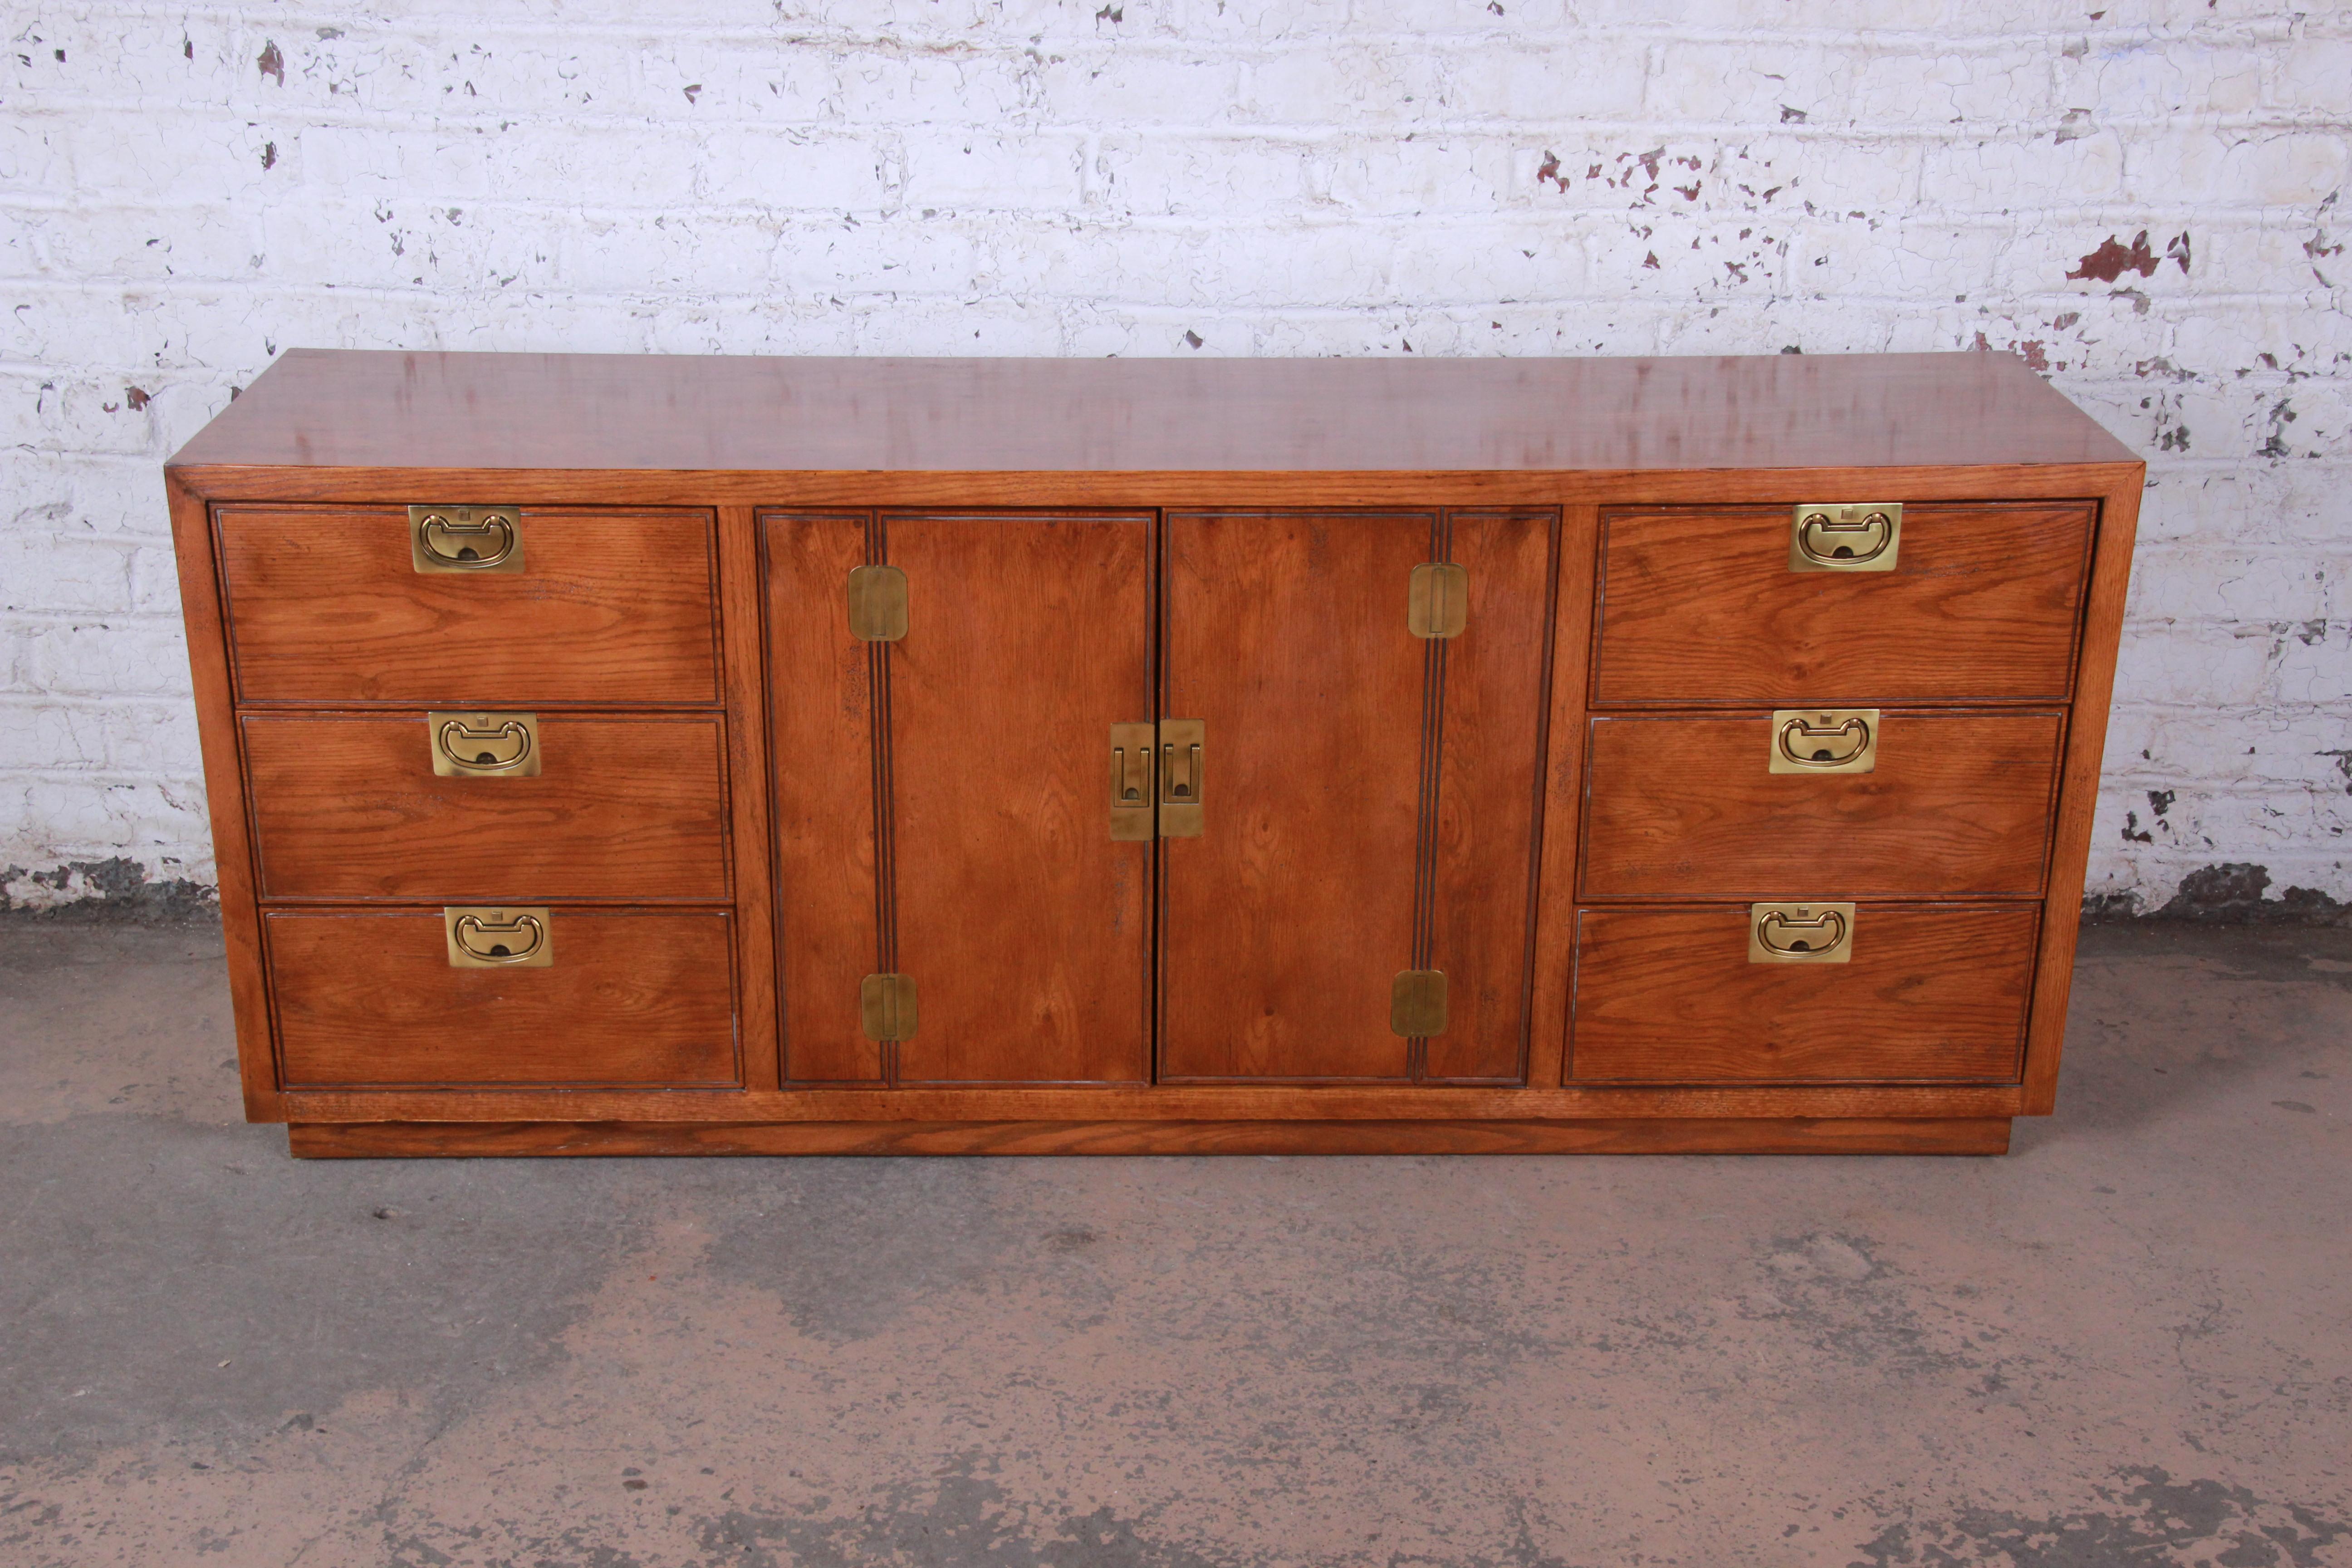 Offering a very nice Henredon Campaign style oak long dresser or credenza from the Bel Air line. The piece offers an ample amount of storage with the two centre cabinet doors opening up to a shelf for storage. On each side of the cabinet doors are